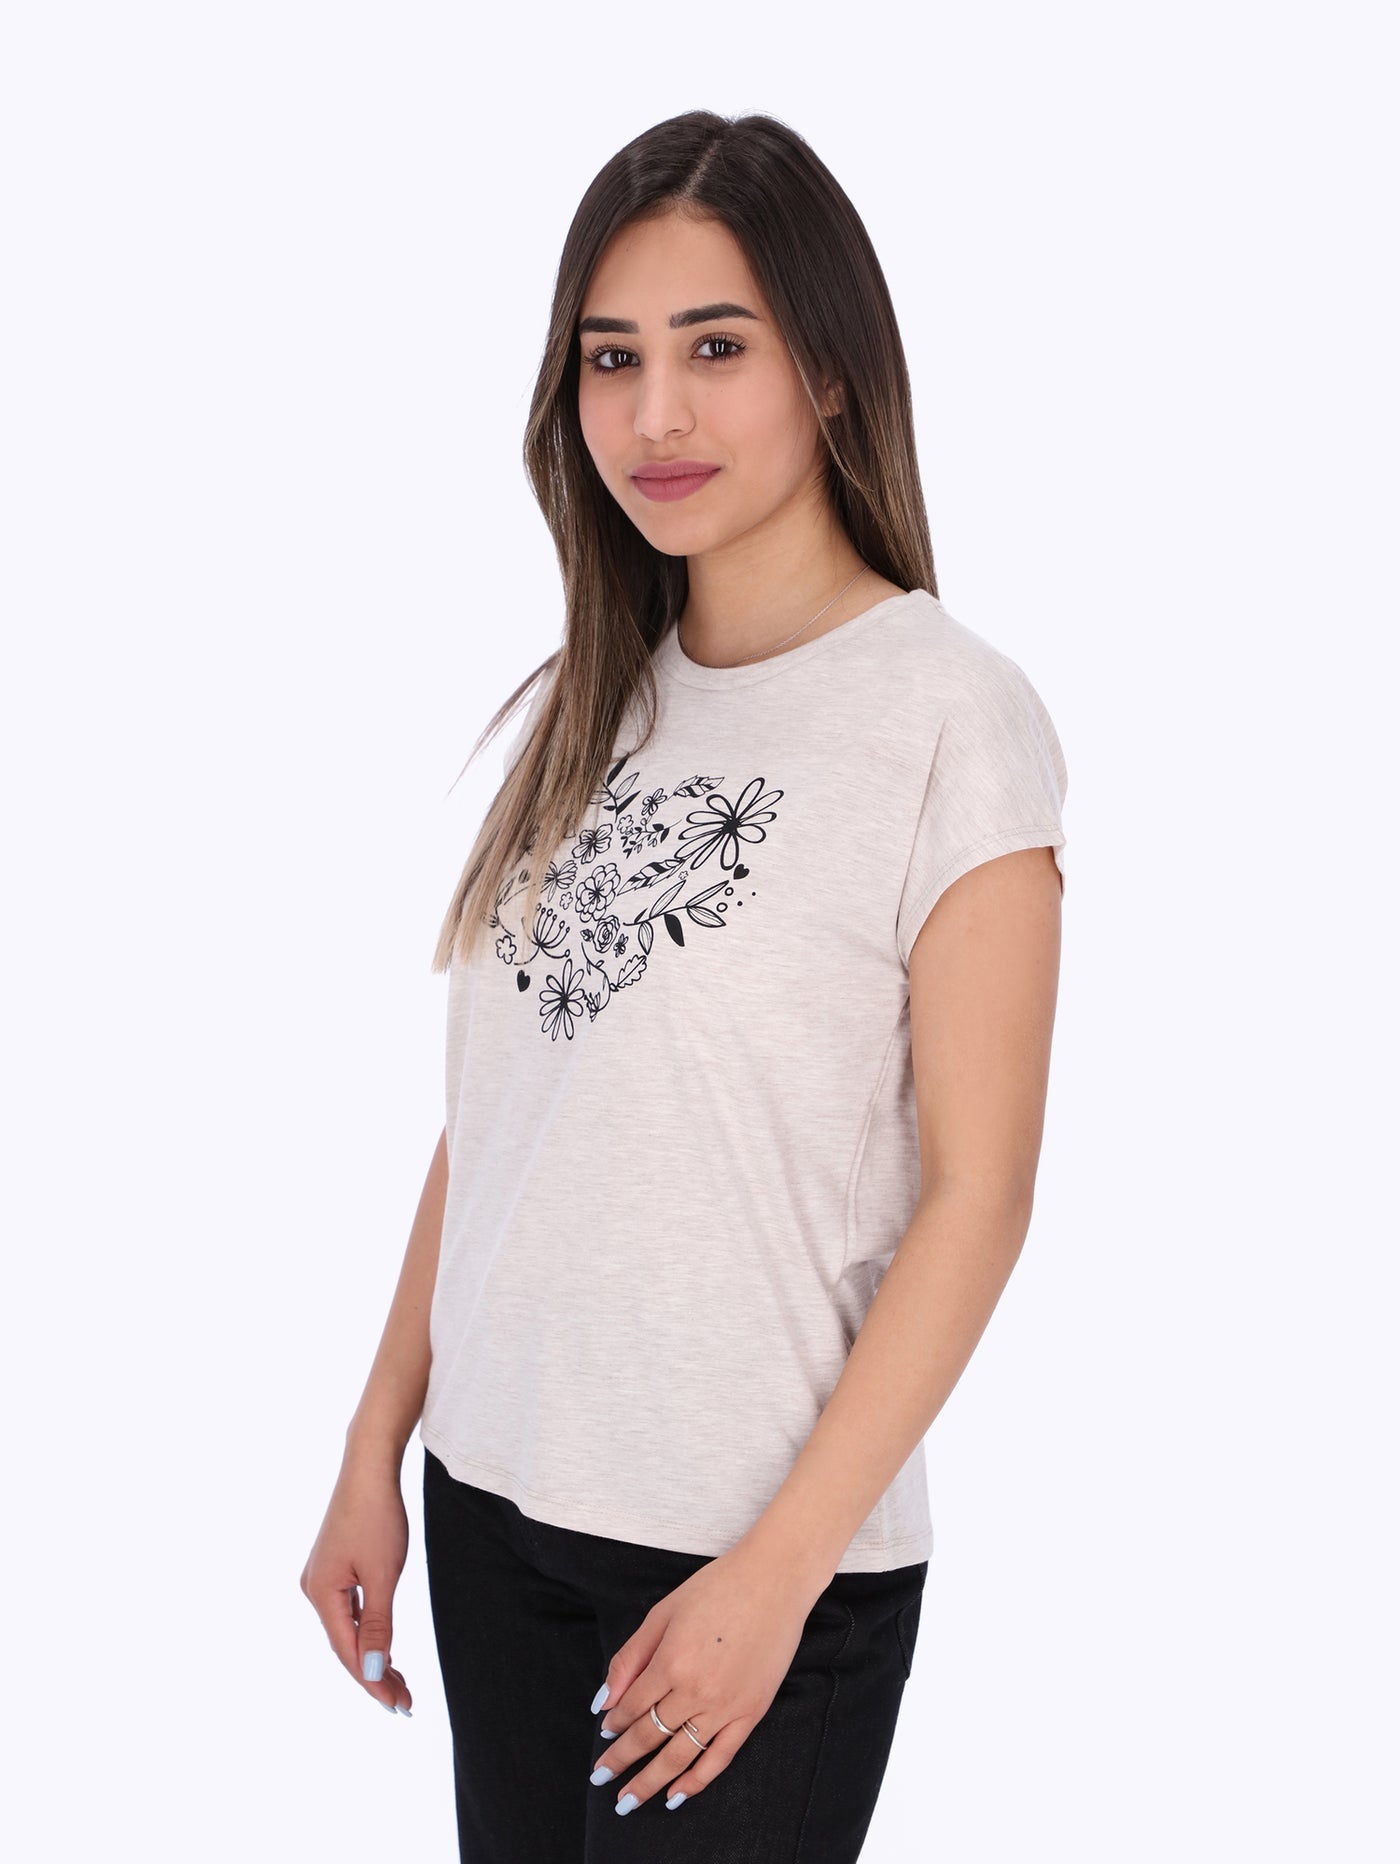 OR Women's Floral Print T-Shirt